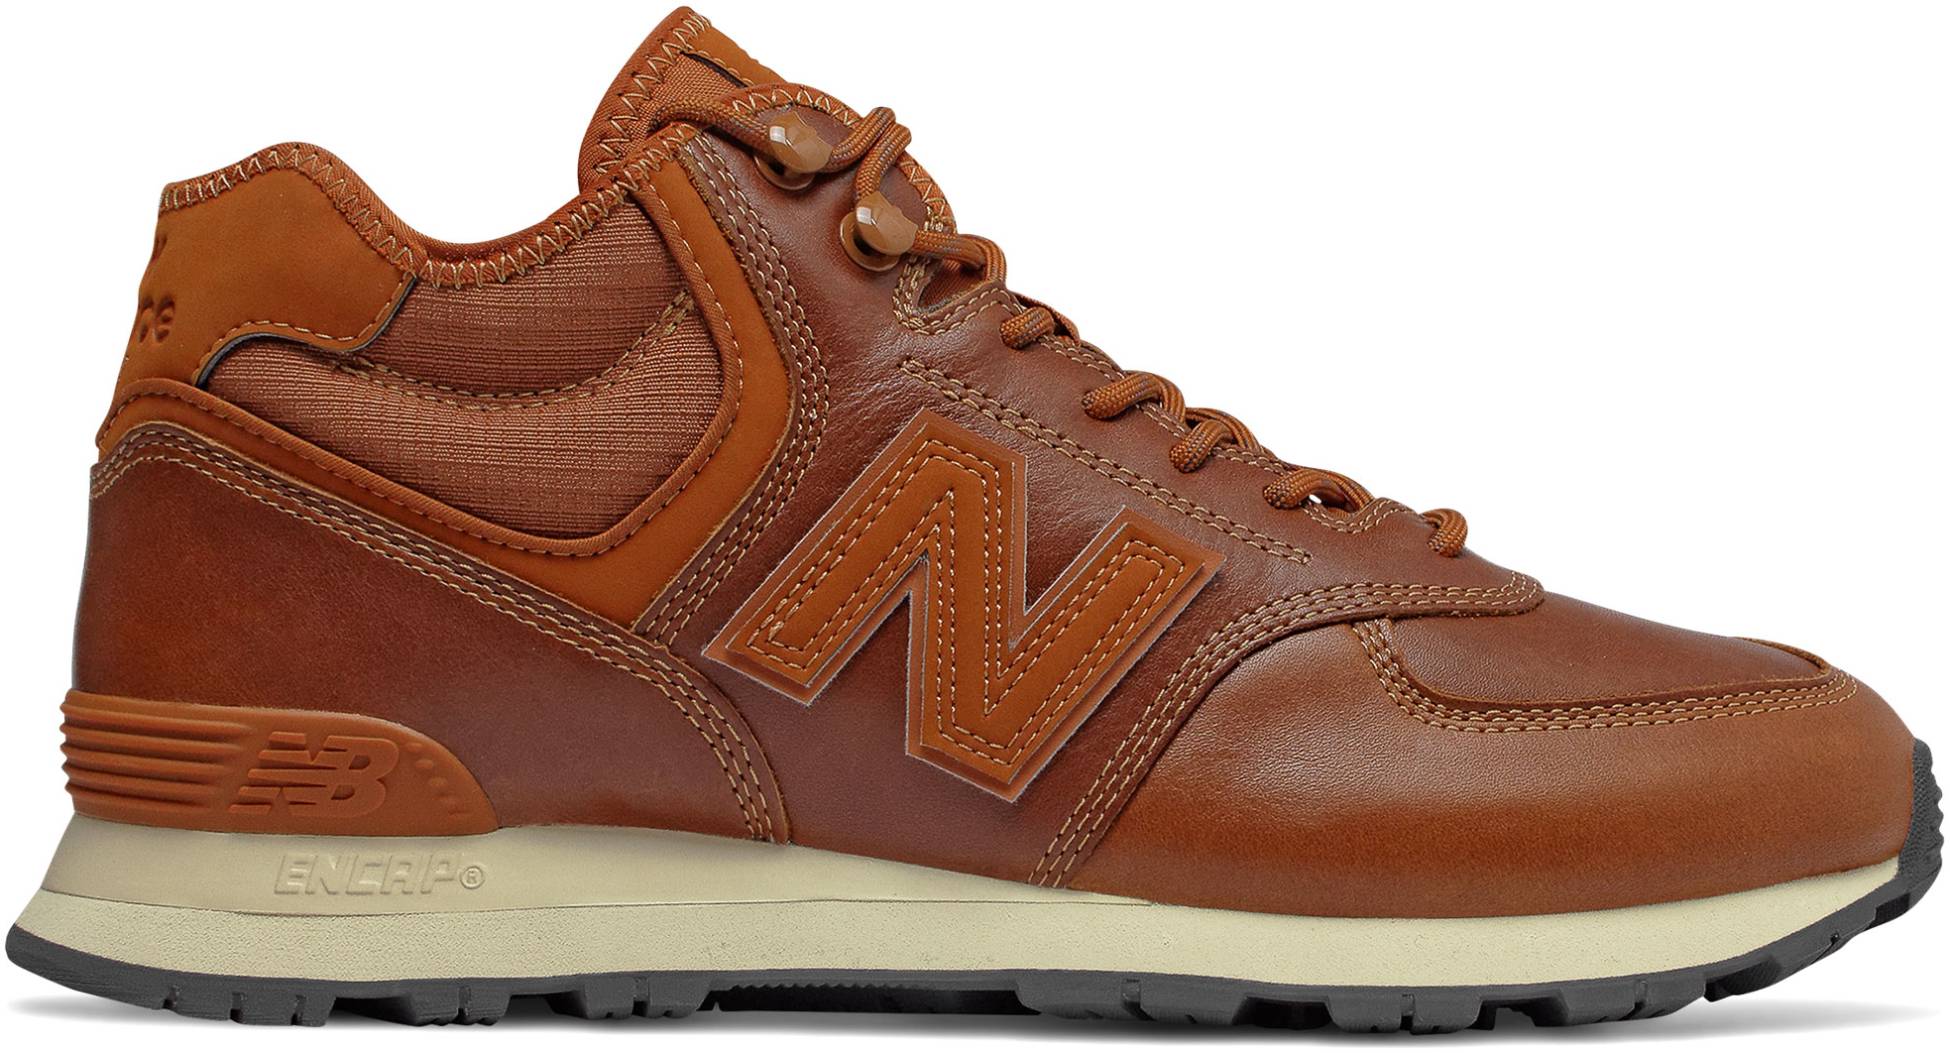 new balance casual shoes